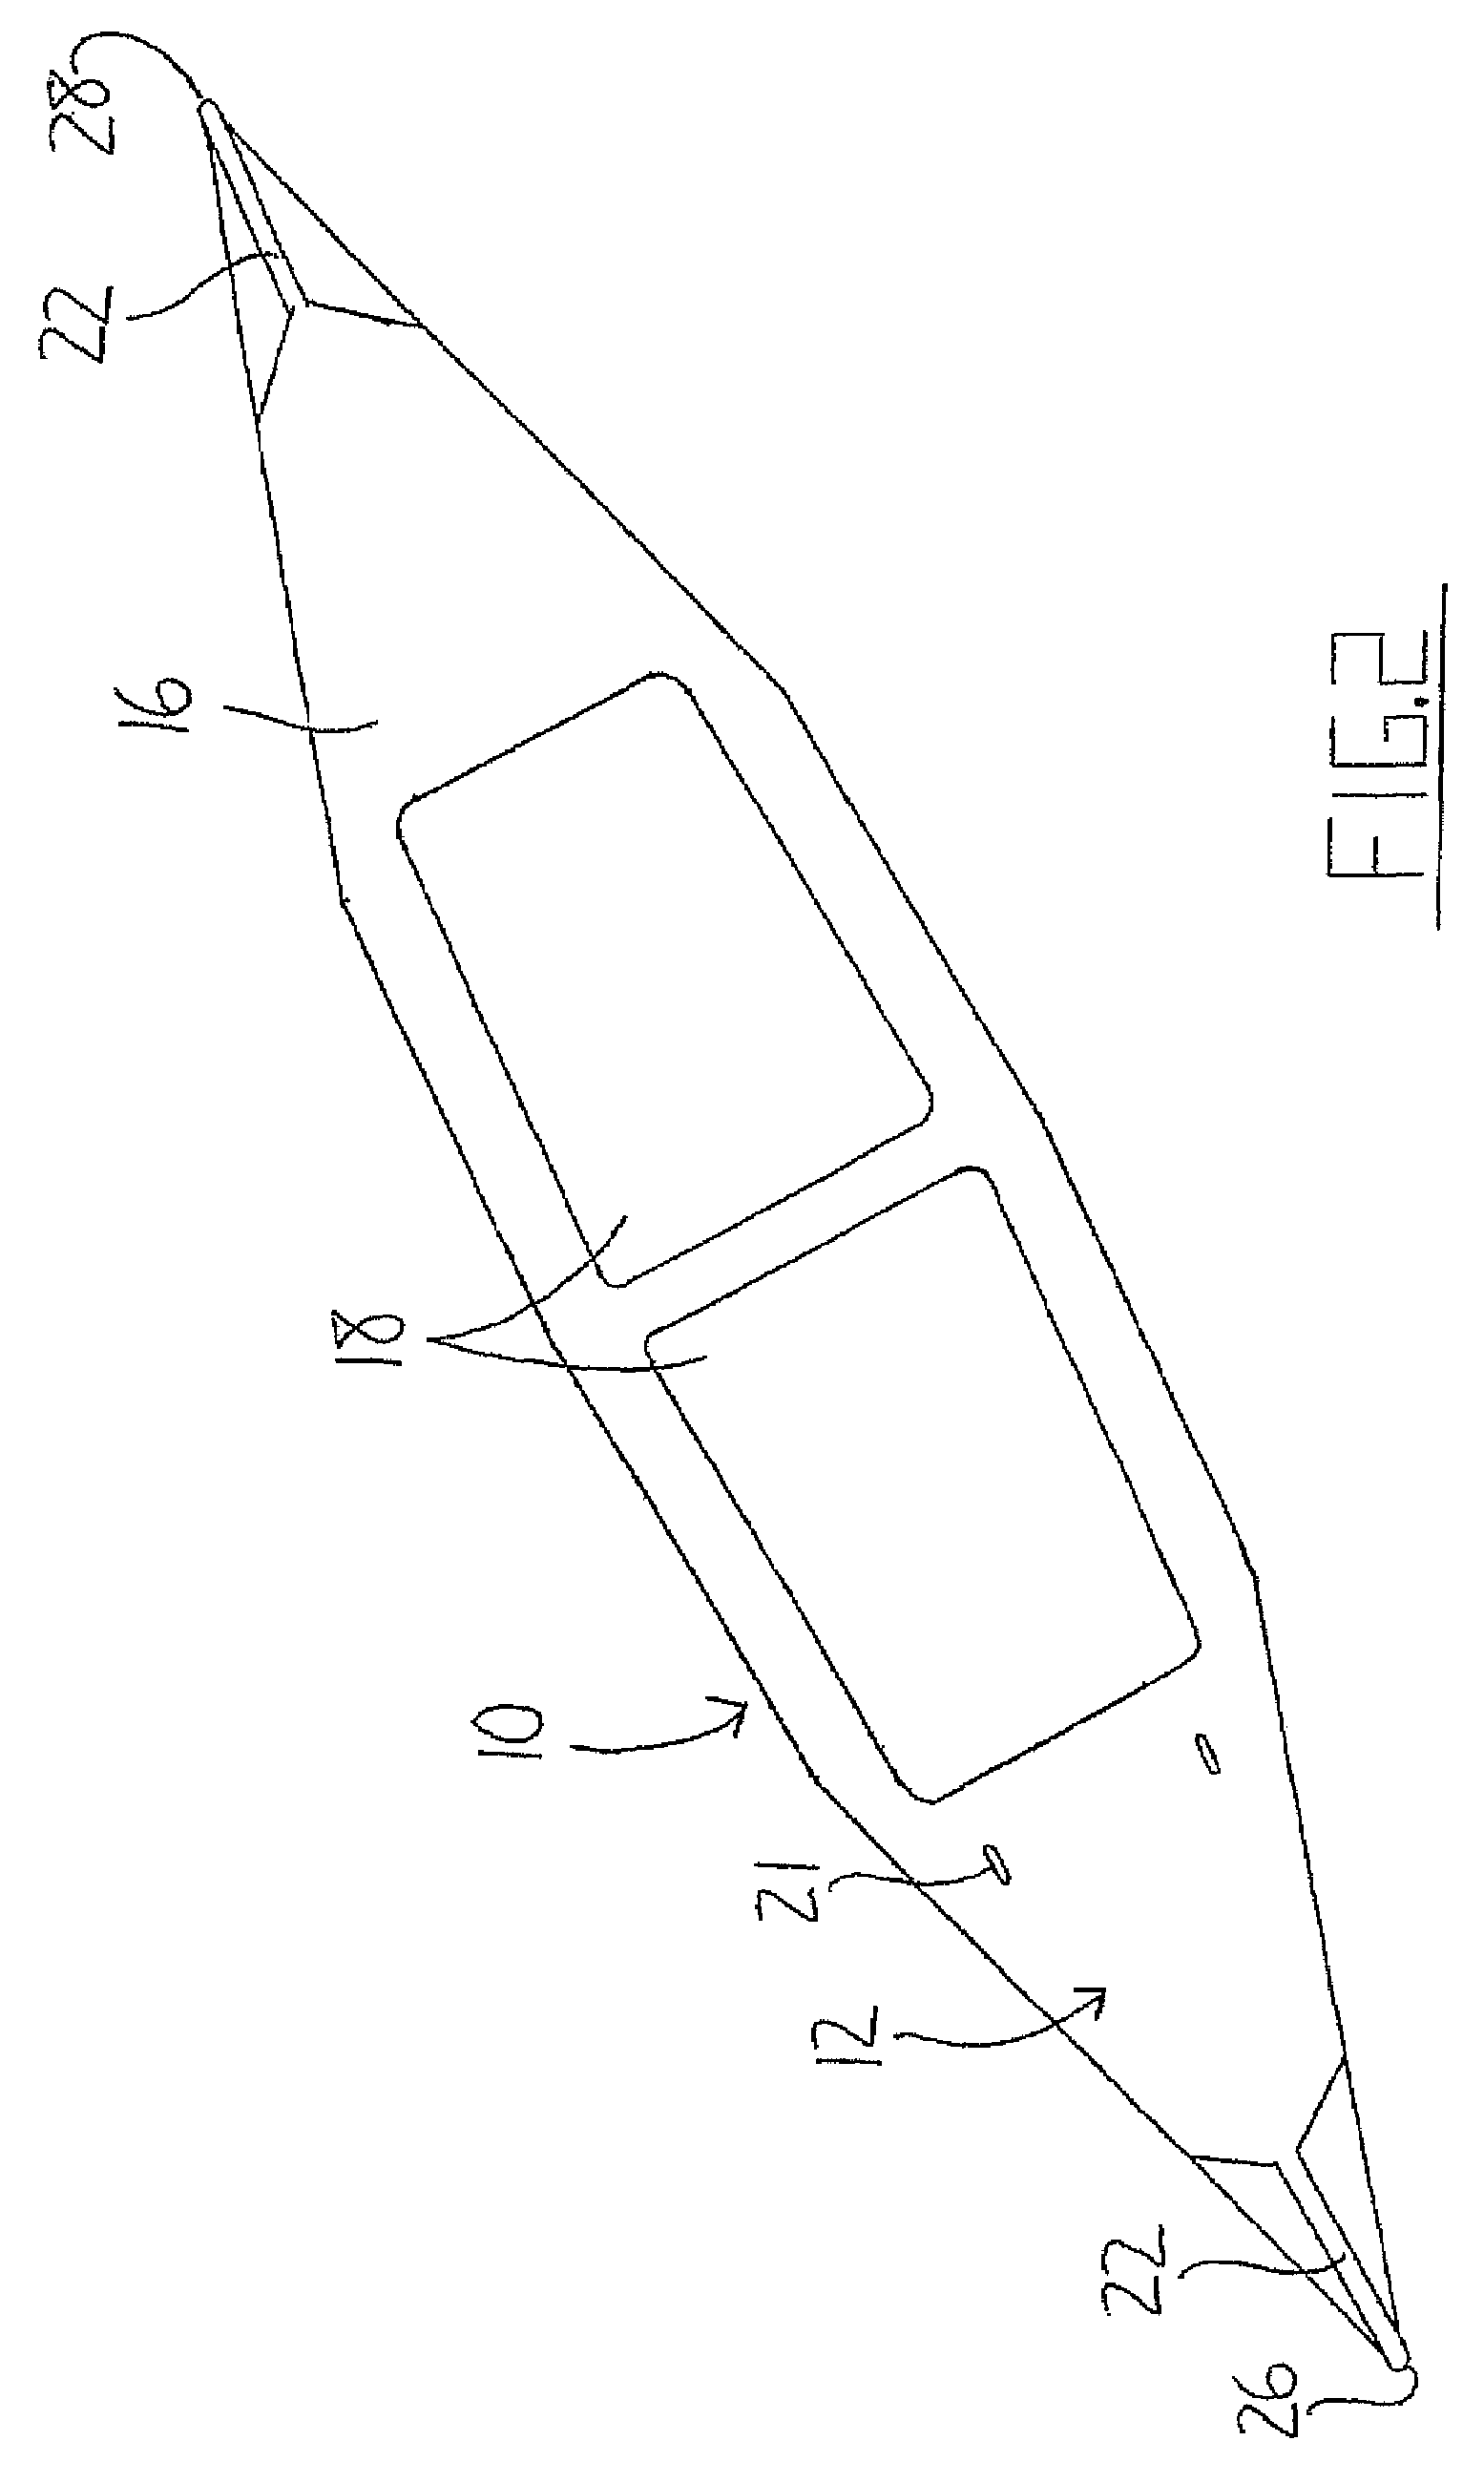 Cargo transport device for towing behind watercraft